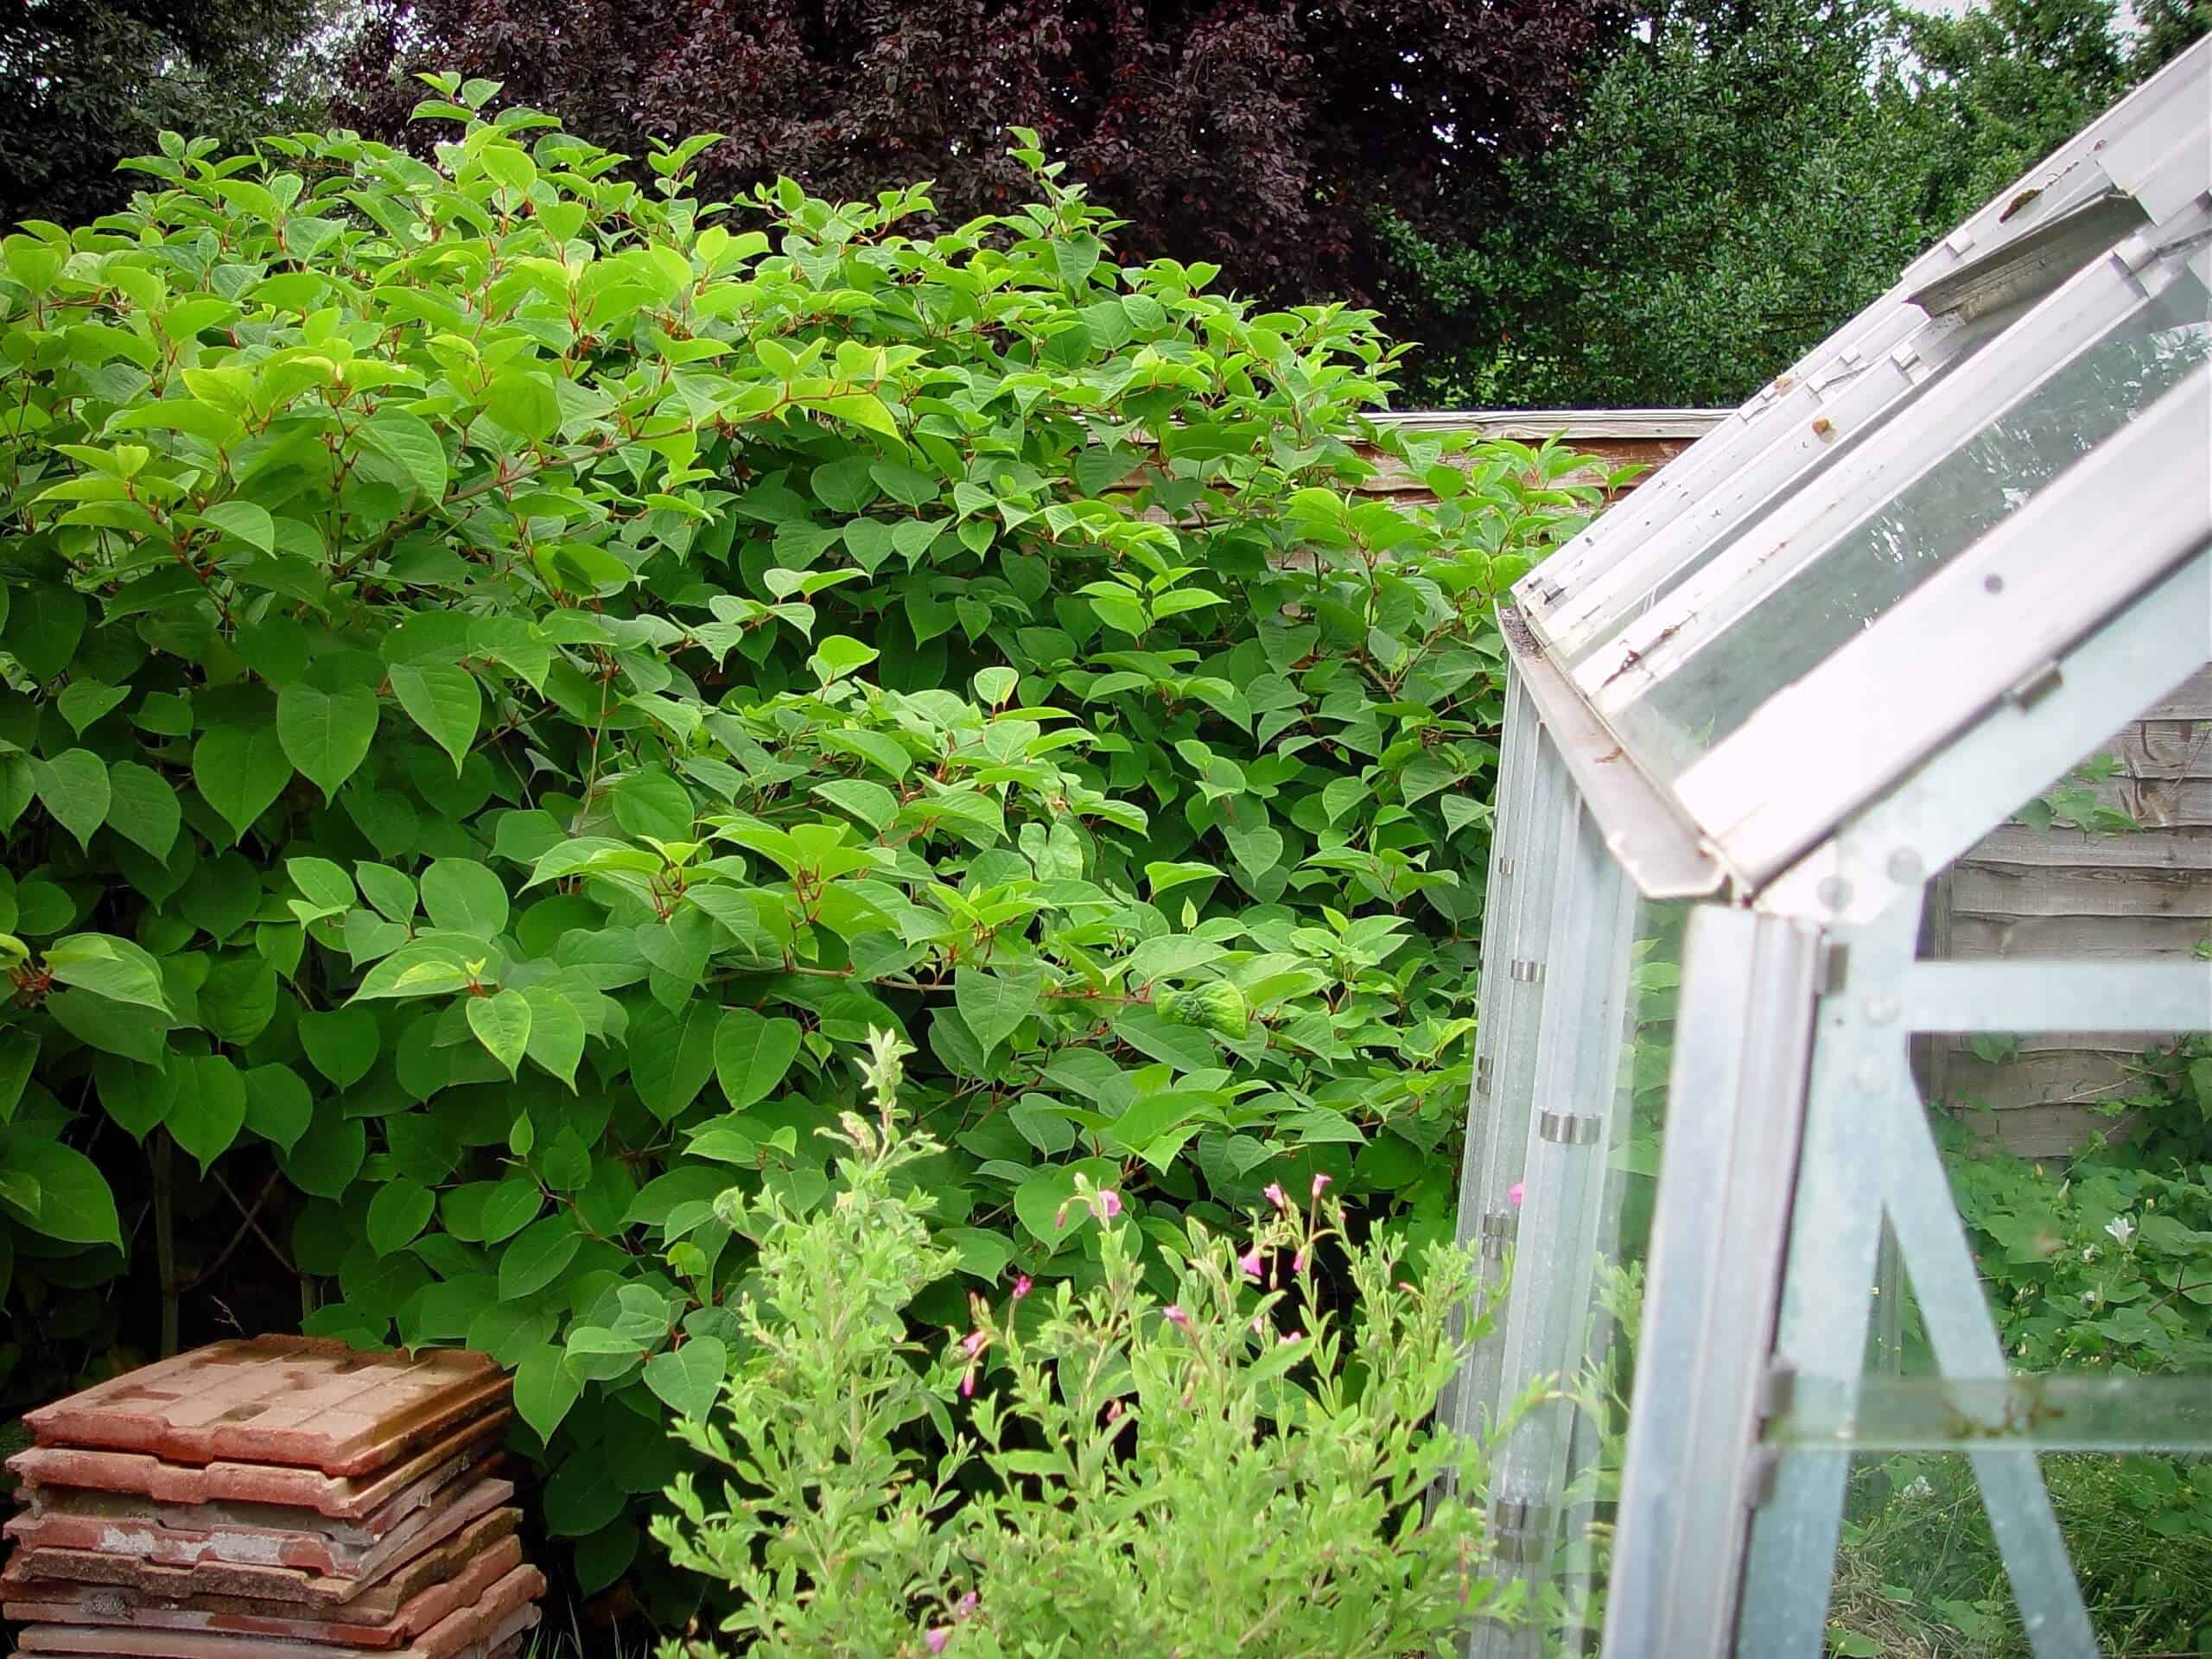 Japanese knotweed easily spreads into your neighbour's property